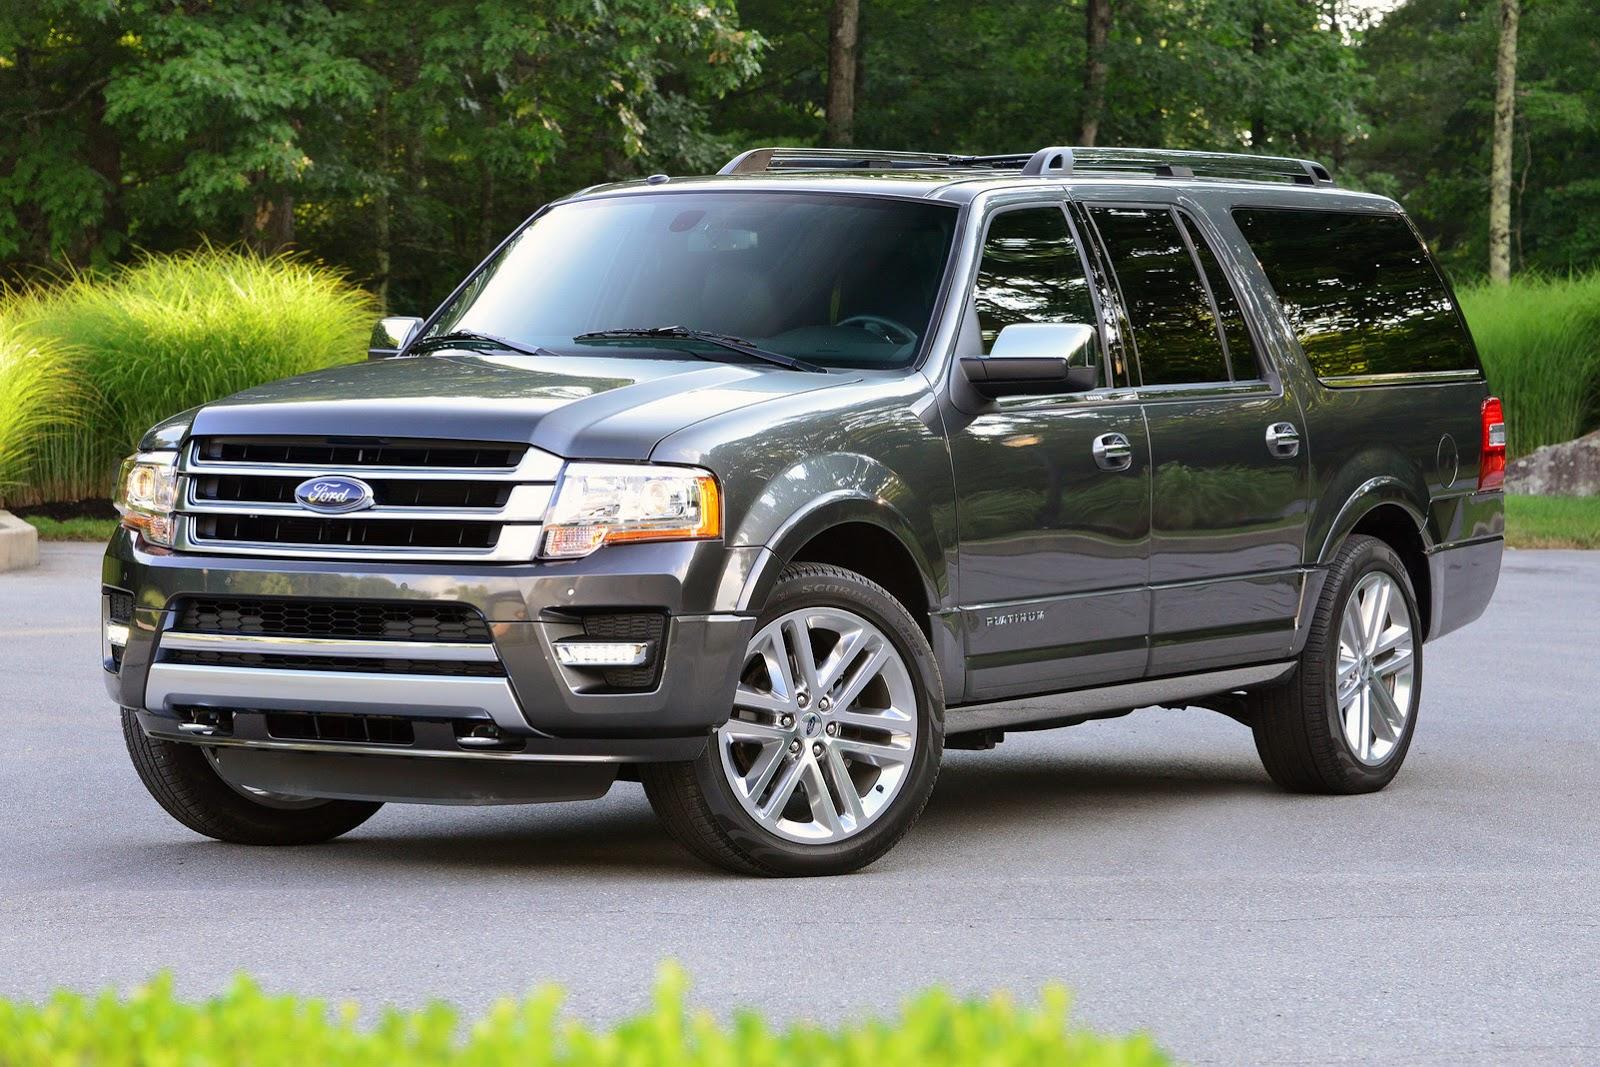 Ford Expedition photo 125315